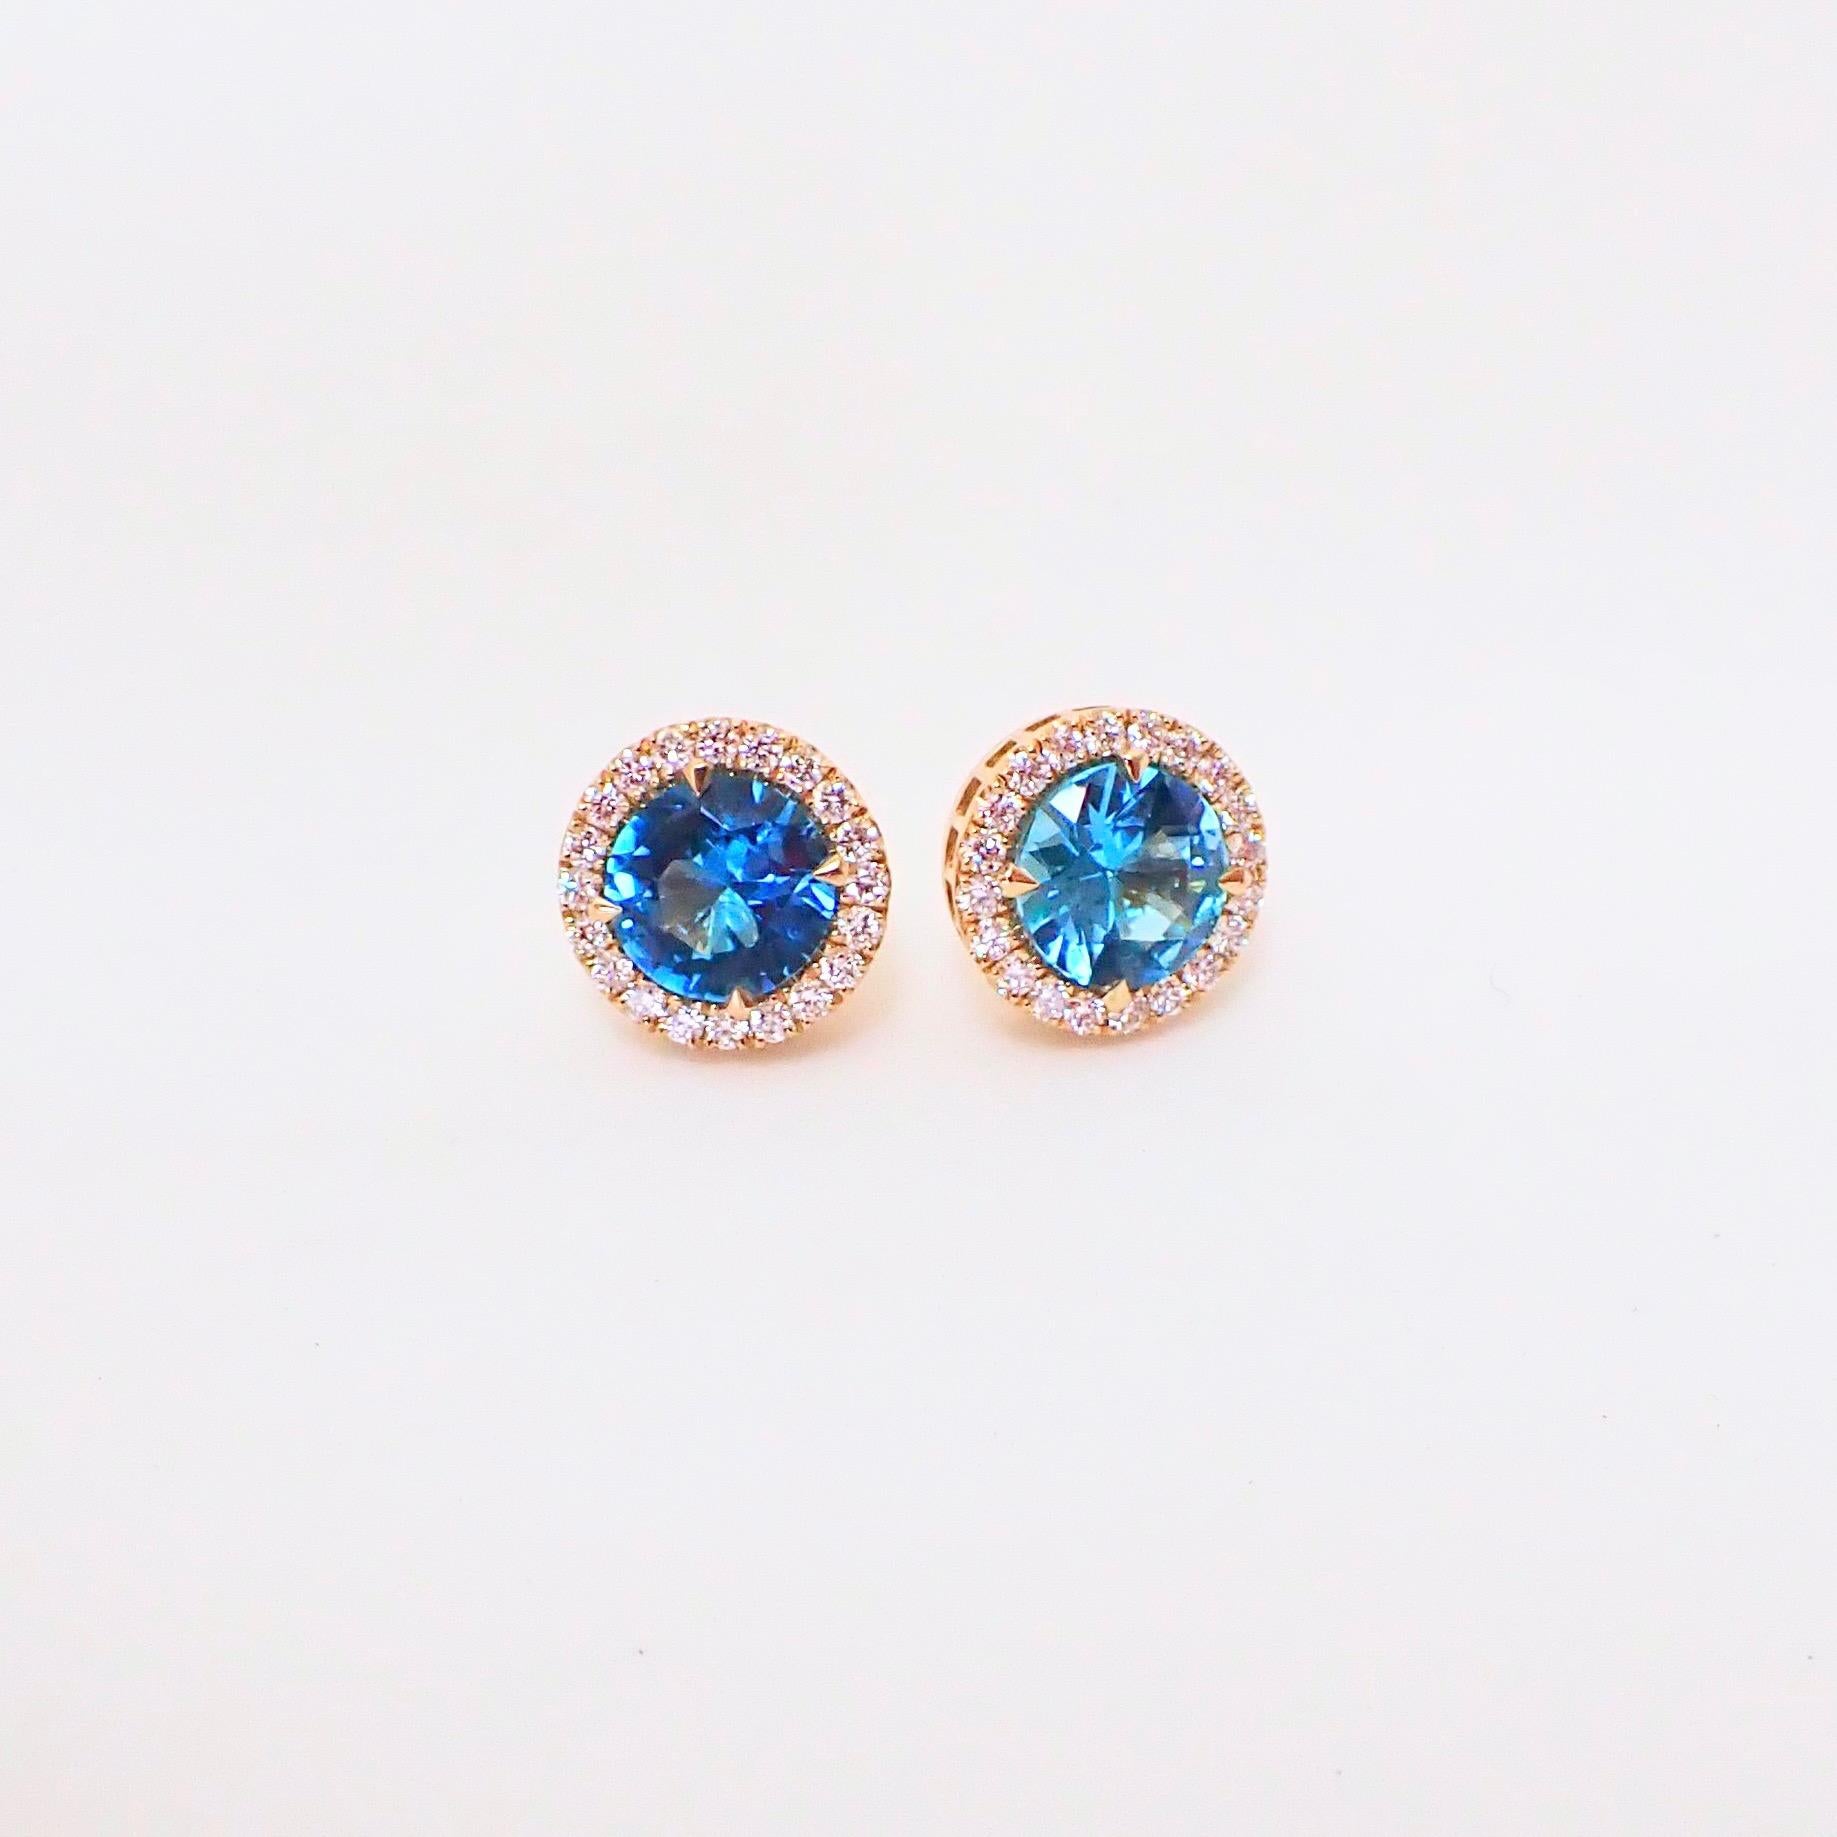 18k Yellow Gold Earrings with 7mm Blue Topaz and 0.42 carats of Diamond